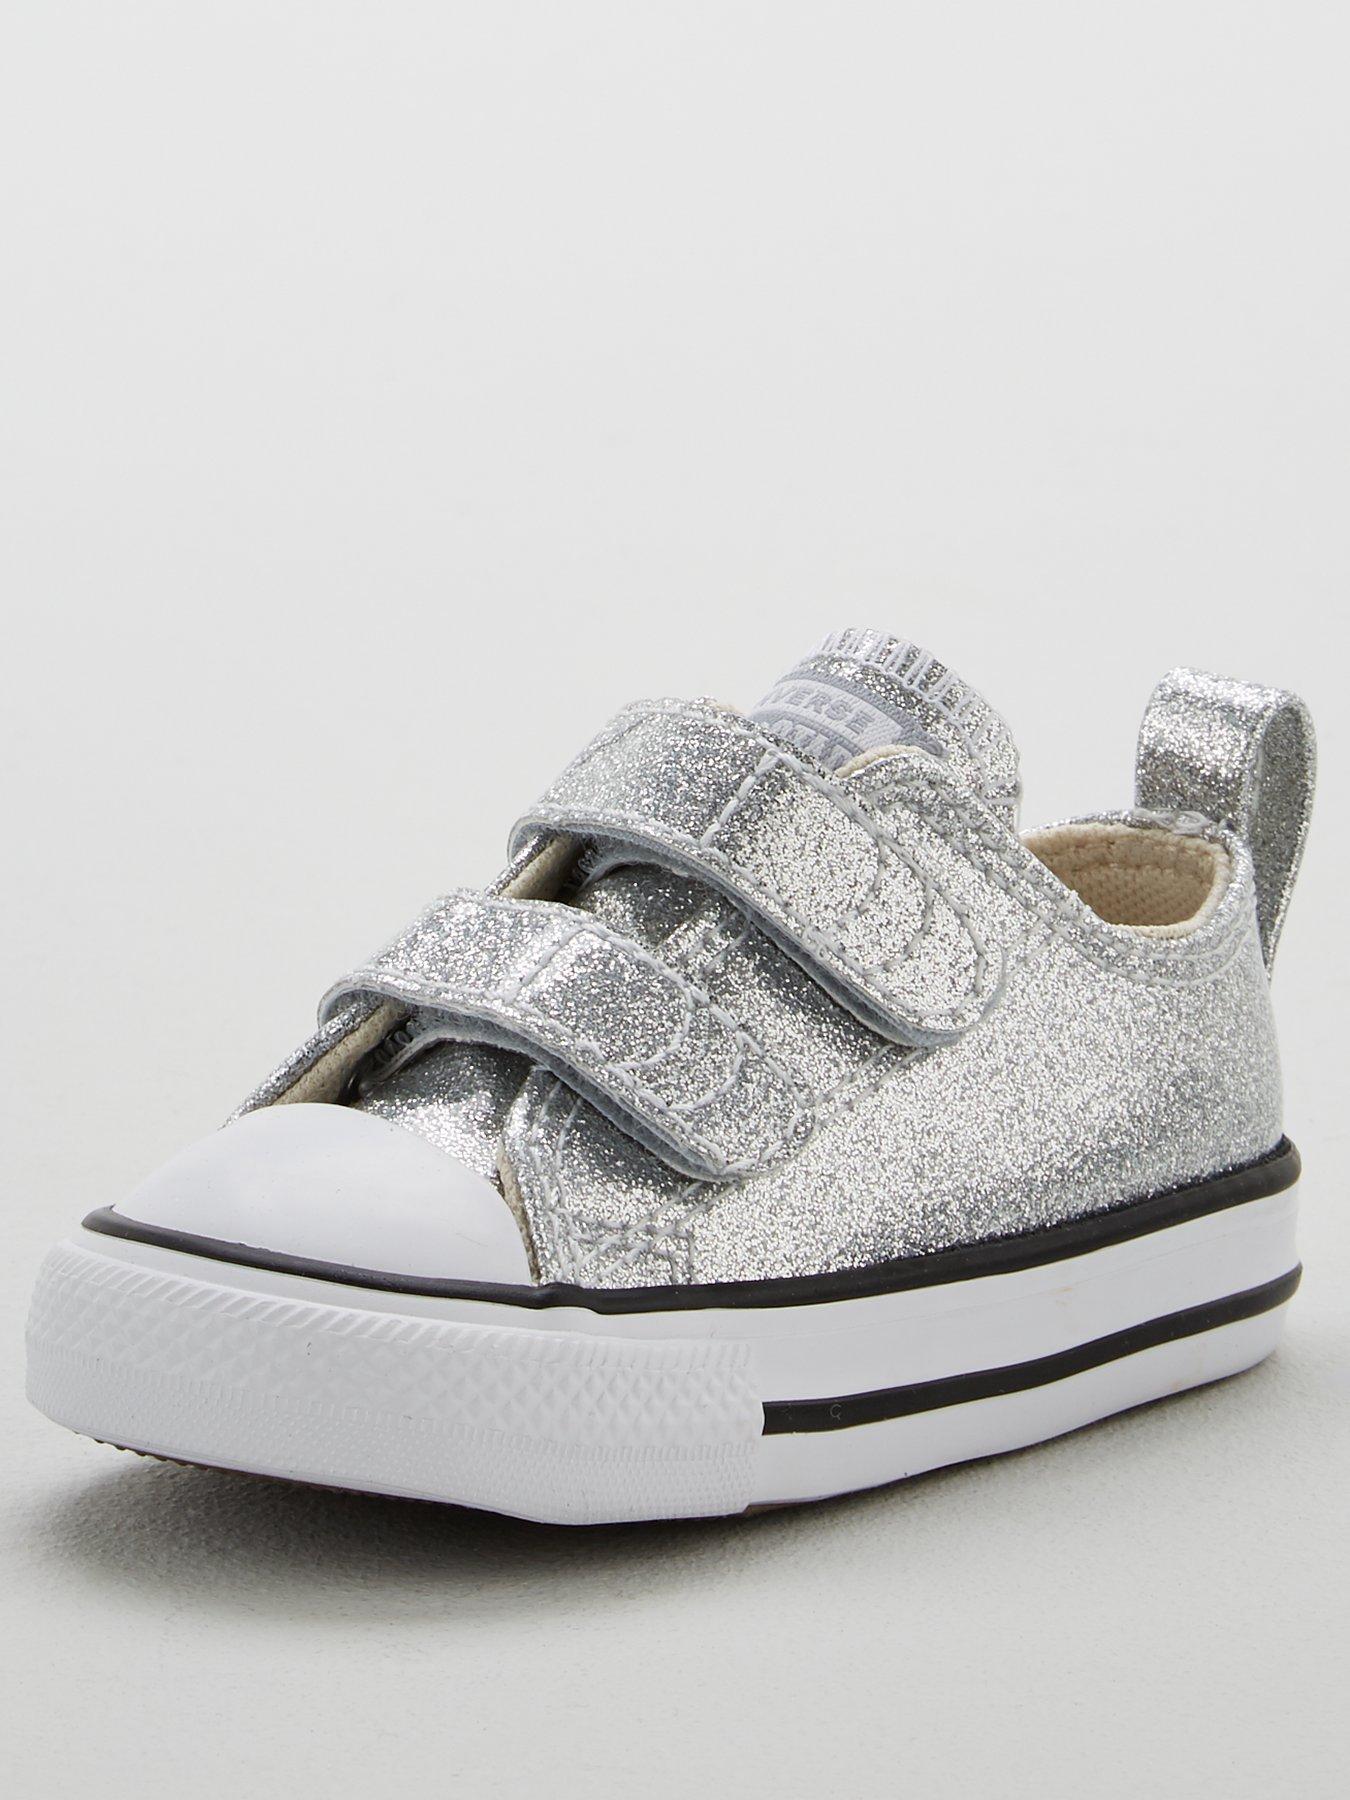 converse all star oxford sparkle infant